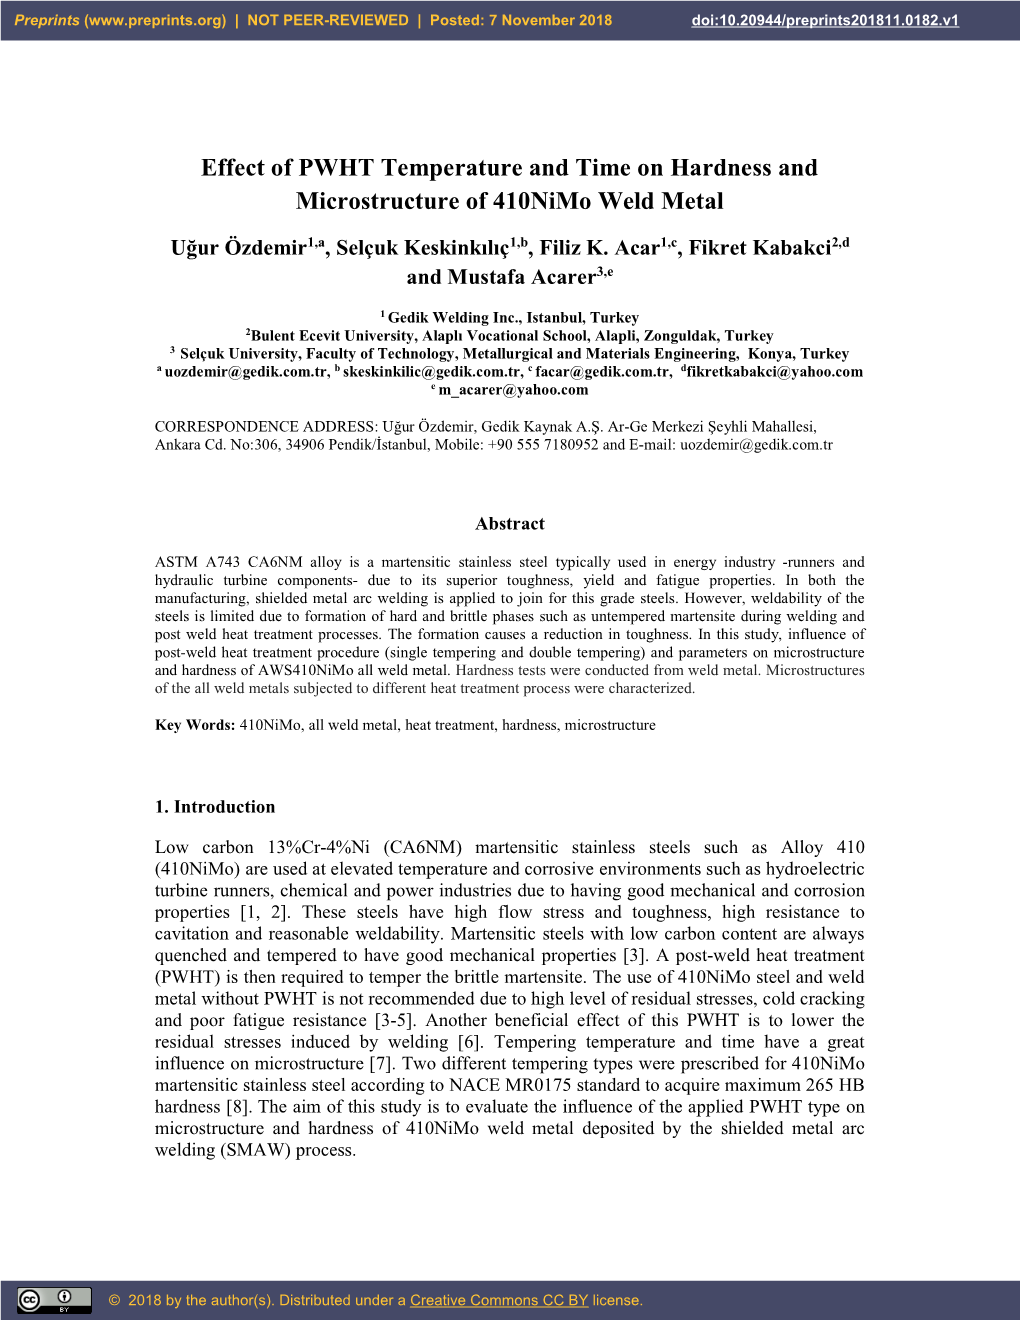 Effect of PWHT Temperature and Time on Hardness and Microstructure of 410Nimo Weld Metal